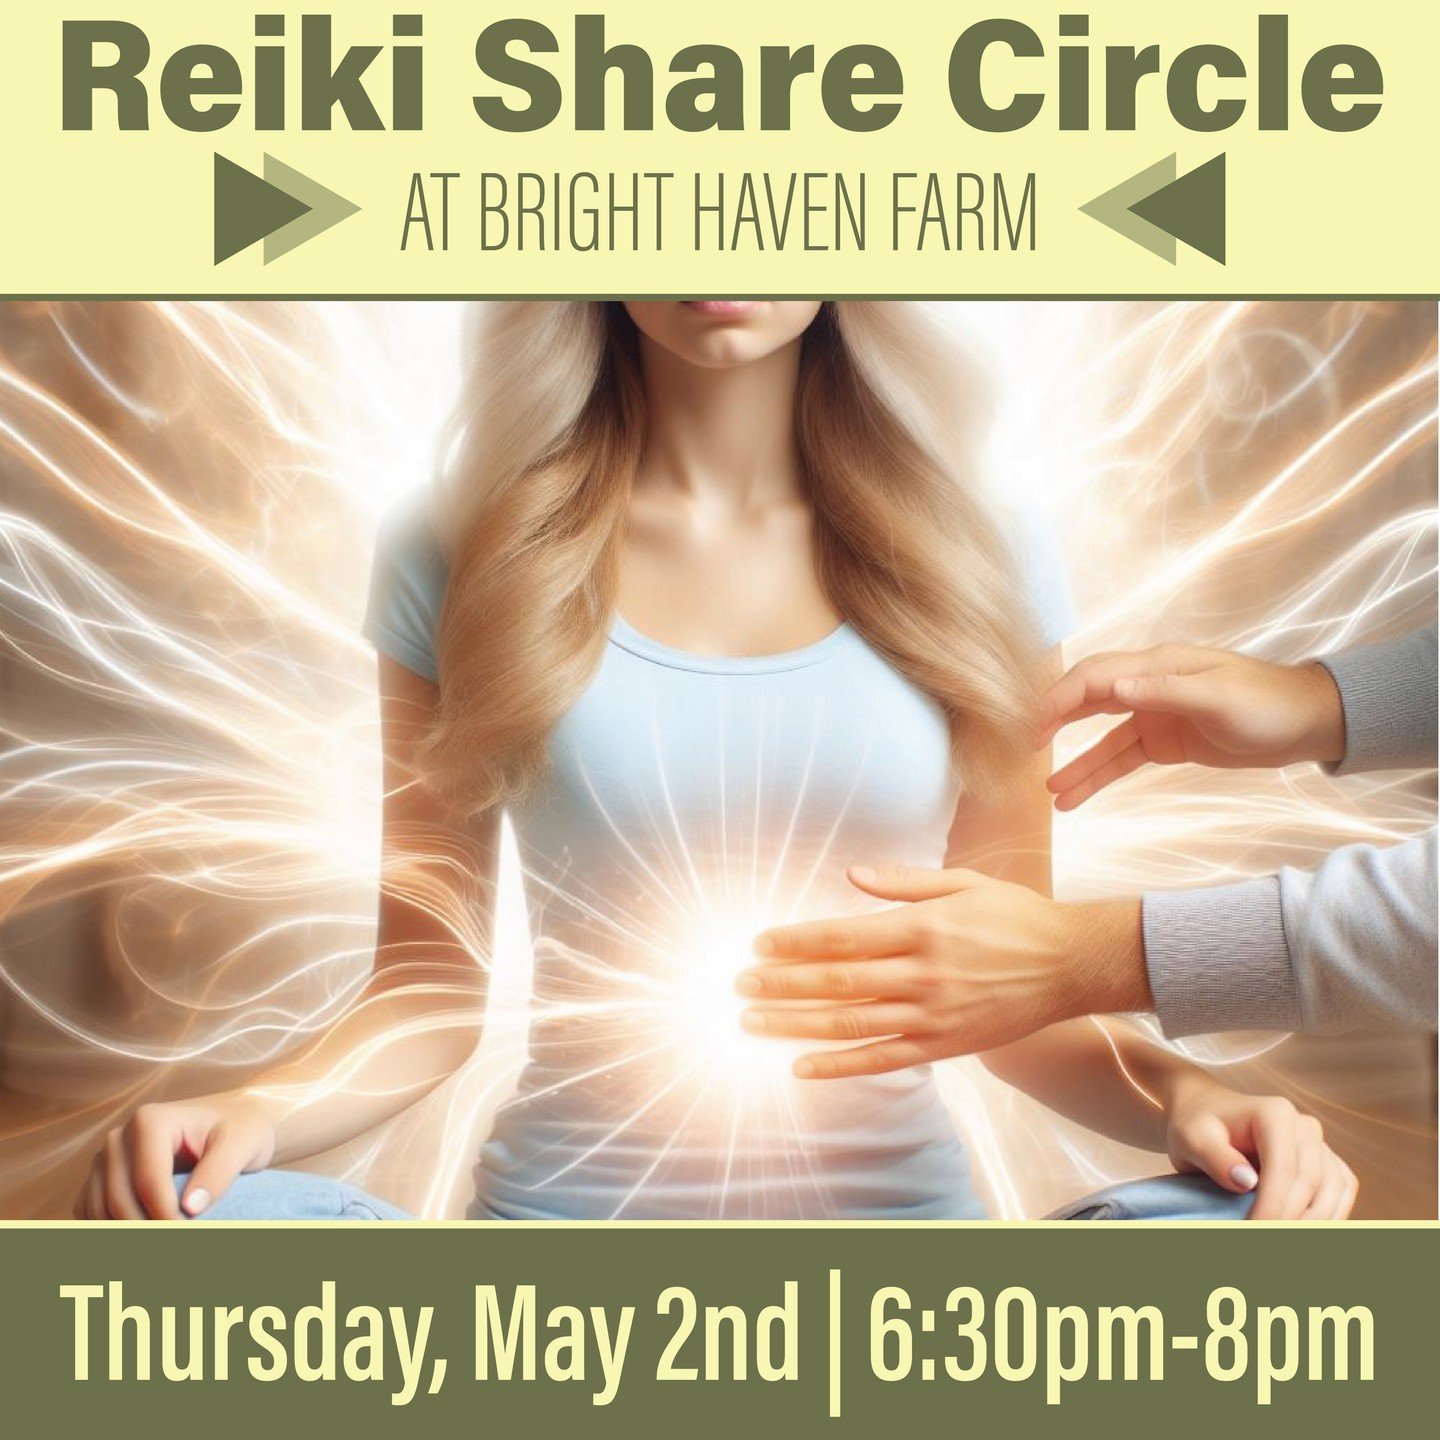 Come practice and share with other likeminded folks. This is an opportunity to both give and receive this beautiful healing modality.

This event is for anyone with level 1, 2 or master attunements within any lineage of reiki energy healing. No pract